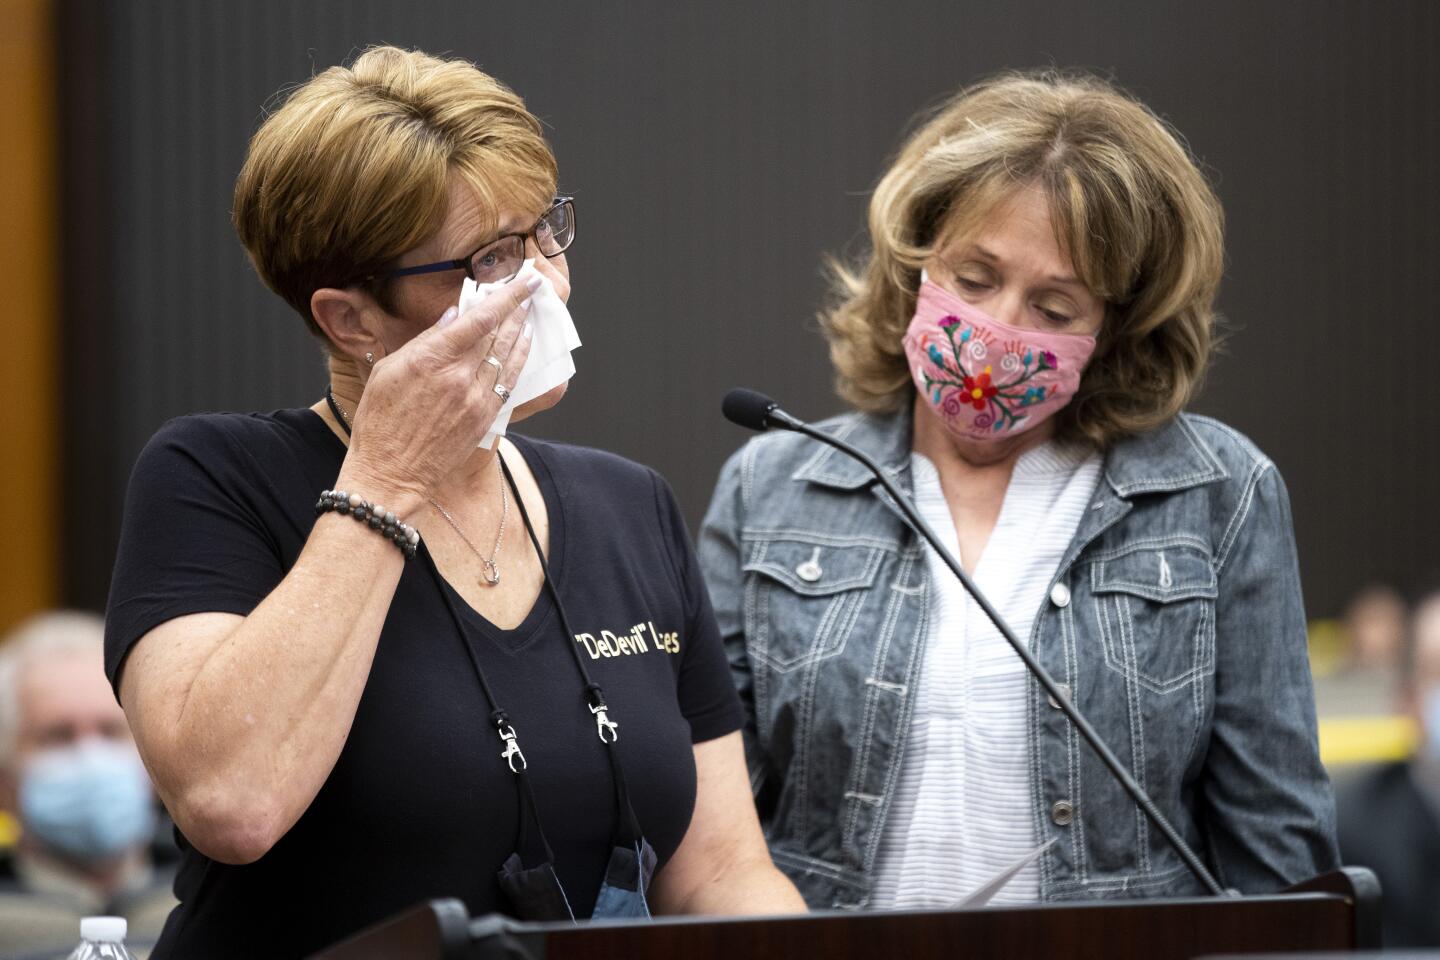 A woman wipes away tears in court.